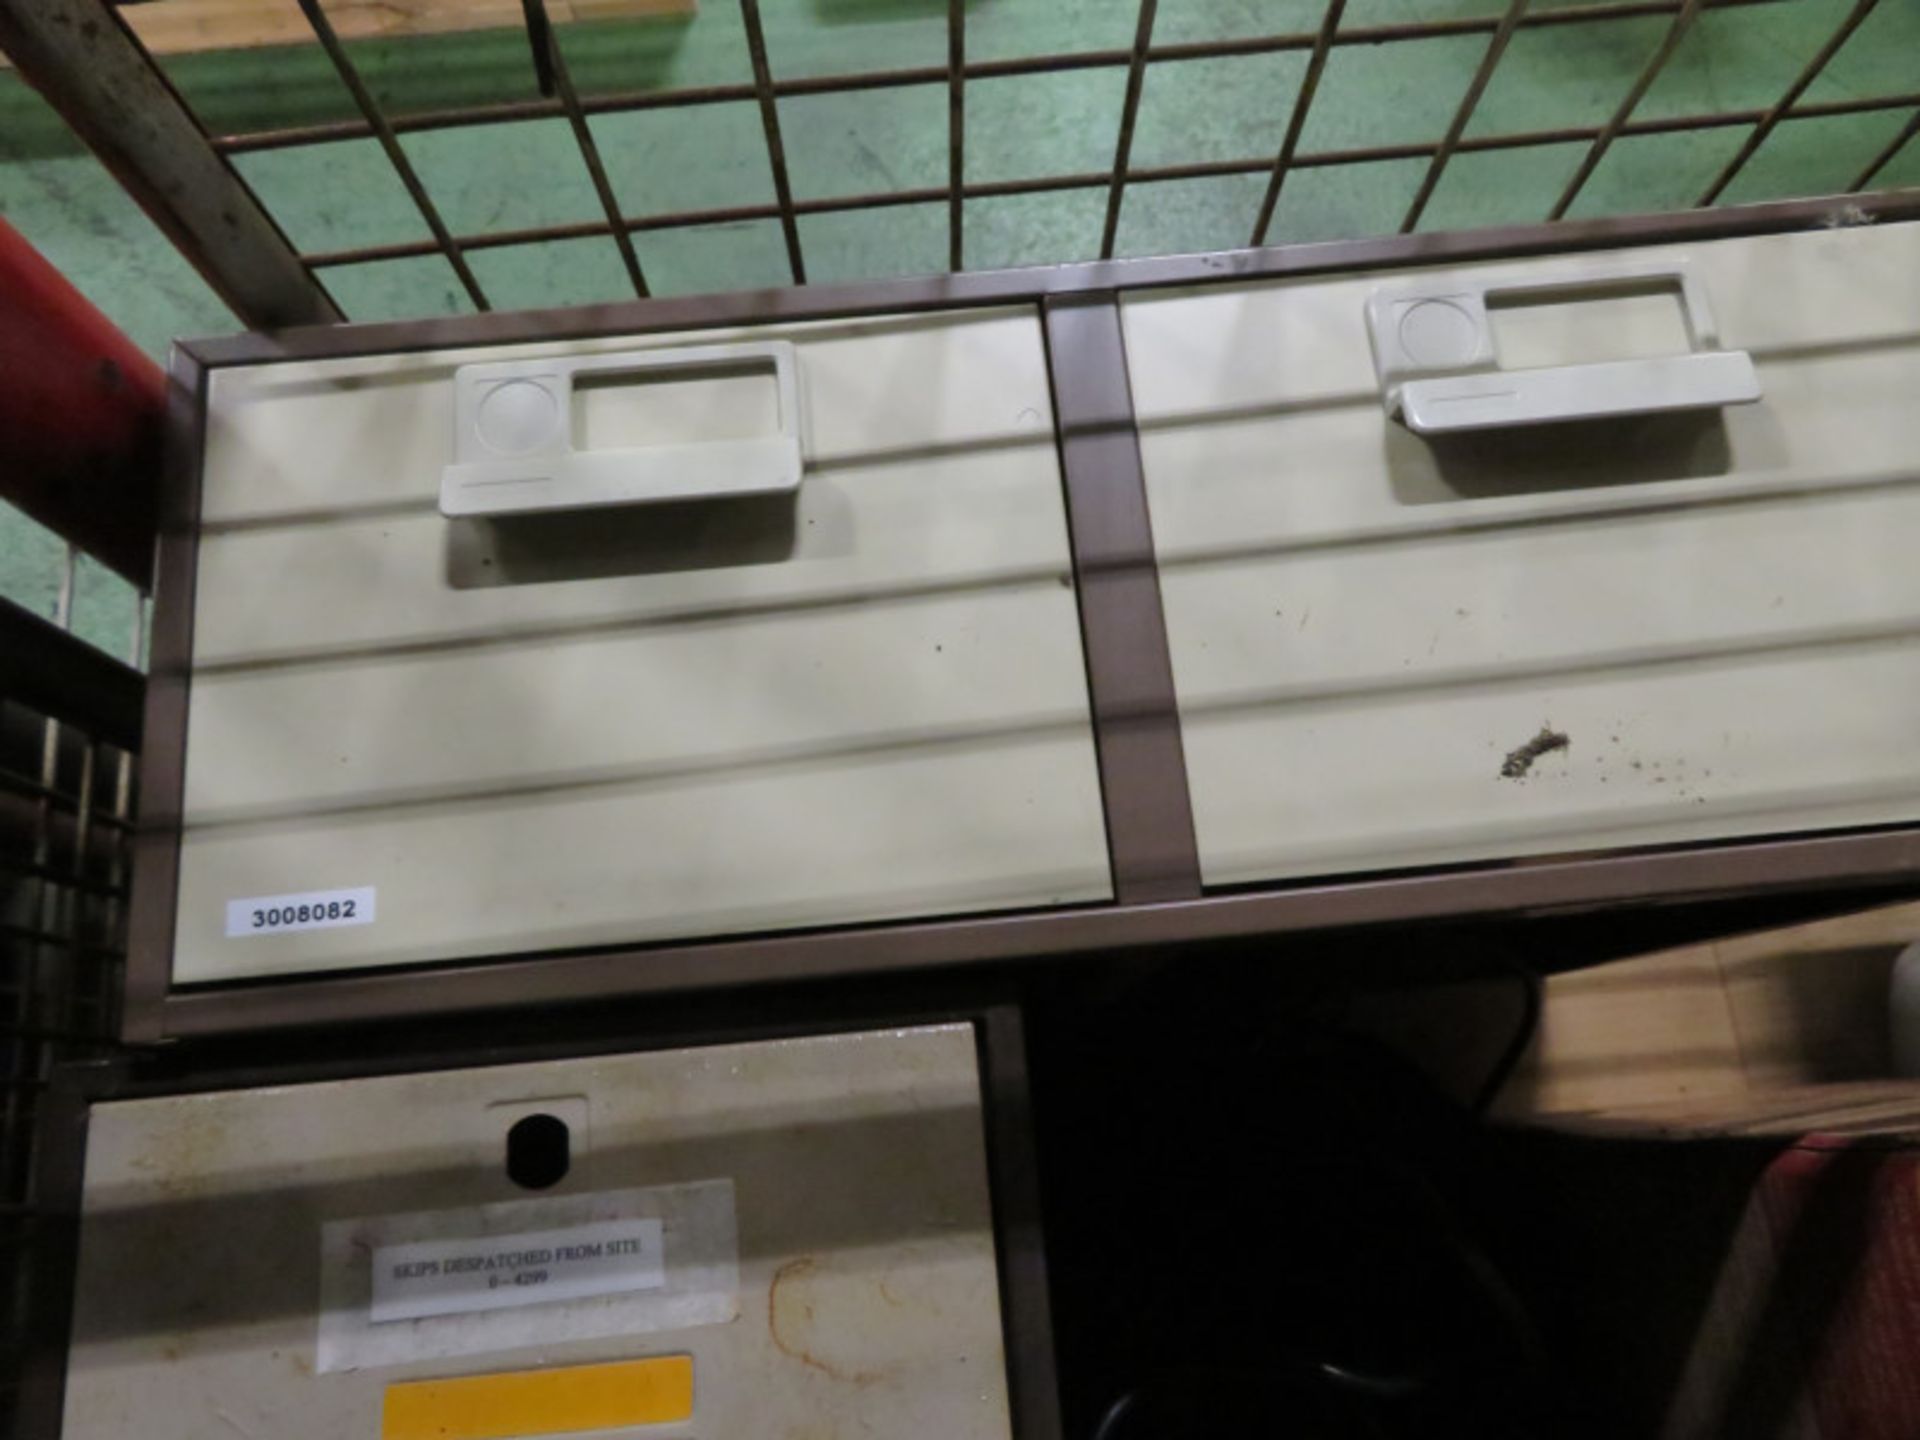 Office equipment - Monitors, keyboards, office drawers - Image 6 of 6